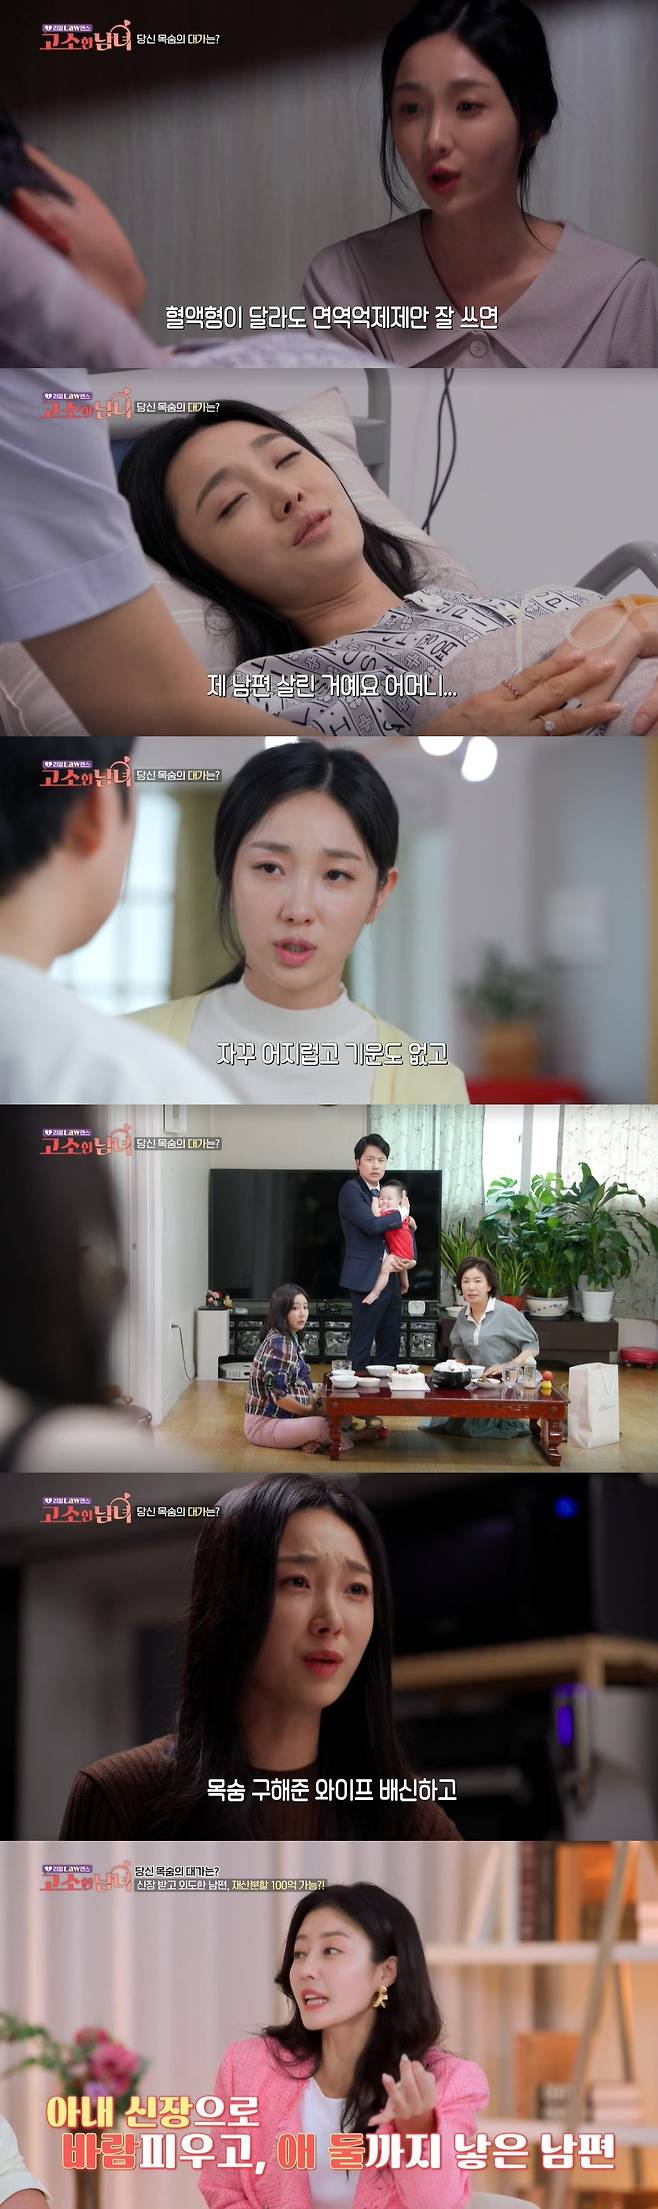 The story of Husband, who betrayed his kidney-donating wife and committed an affair, was revealed.SBS Plus, ENA Real Toon Hermans Criminal Accusation Gender pay gap (hereinafter referred to as Criminal Accusation Gender pay gap), which was first broadcast on July 11, The Horribly Slow Murderer with the Extremely .Oh Jae-ae, who was revealed on the day, decided to transplant kidneys for Husband who had acute renal failure.Oh Jung-ae, who had been waiting for her pregnancy, comforted Husband, saying, Even if you dont have a kidney, it doesnt hurt to live. Even if your blood type is different due to the development of medicine these days, you can live as long as you use immunosuppressants.Unlike Husband, who became healthy after the surgery, Oh Jung-ae did not recover easily due to a decrease in her immune system.Ten years later, he heard from his acquaintance that Husband had made a lot of money, and he witnessed an unexpected sight in his familys house for a long time.Husband has had an affair with another woman and has even had an out-of-wedlock child. In Husband, who is demanding a divorce, Oh Jae-ae applied for 10 billion won in property division, saying, It seems like my life has been taken away.Kim Ji-min, who was watching this, was surprised, saying, Our program is over after only one time. It is too strong.Lee Ji Hyun said, I cheated on my kidneys and gave birth to two children. This is why I have no choice but to go crazy.